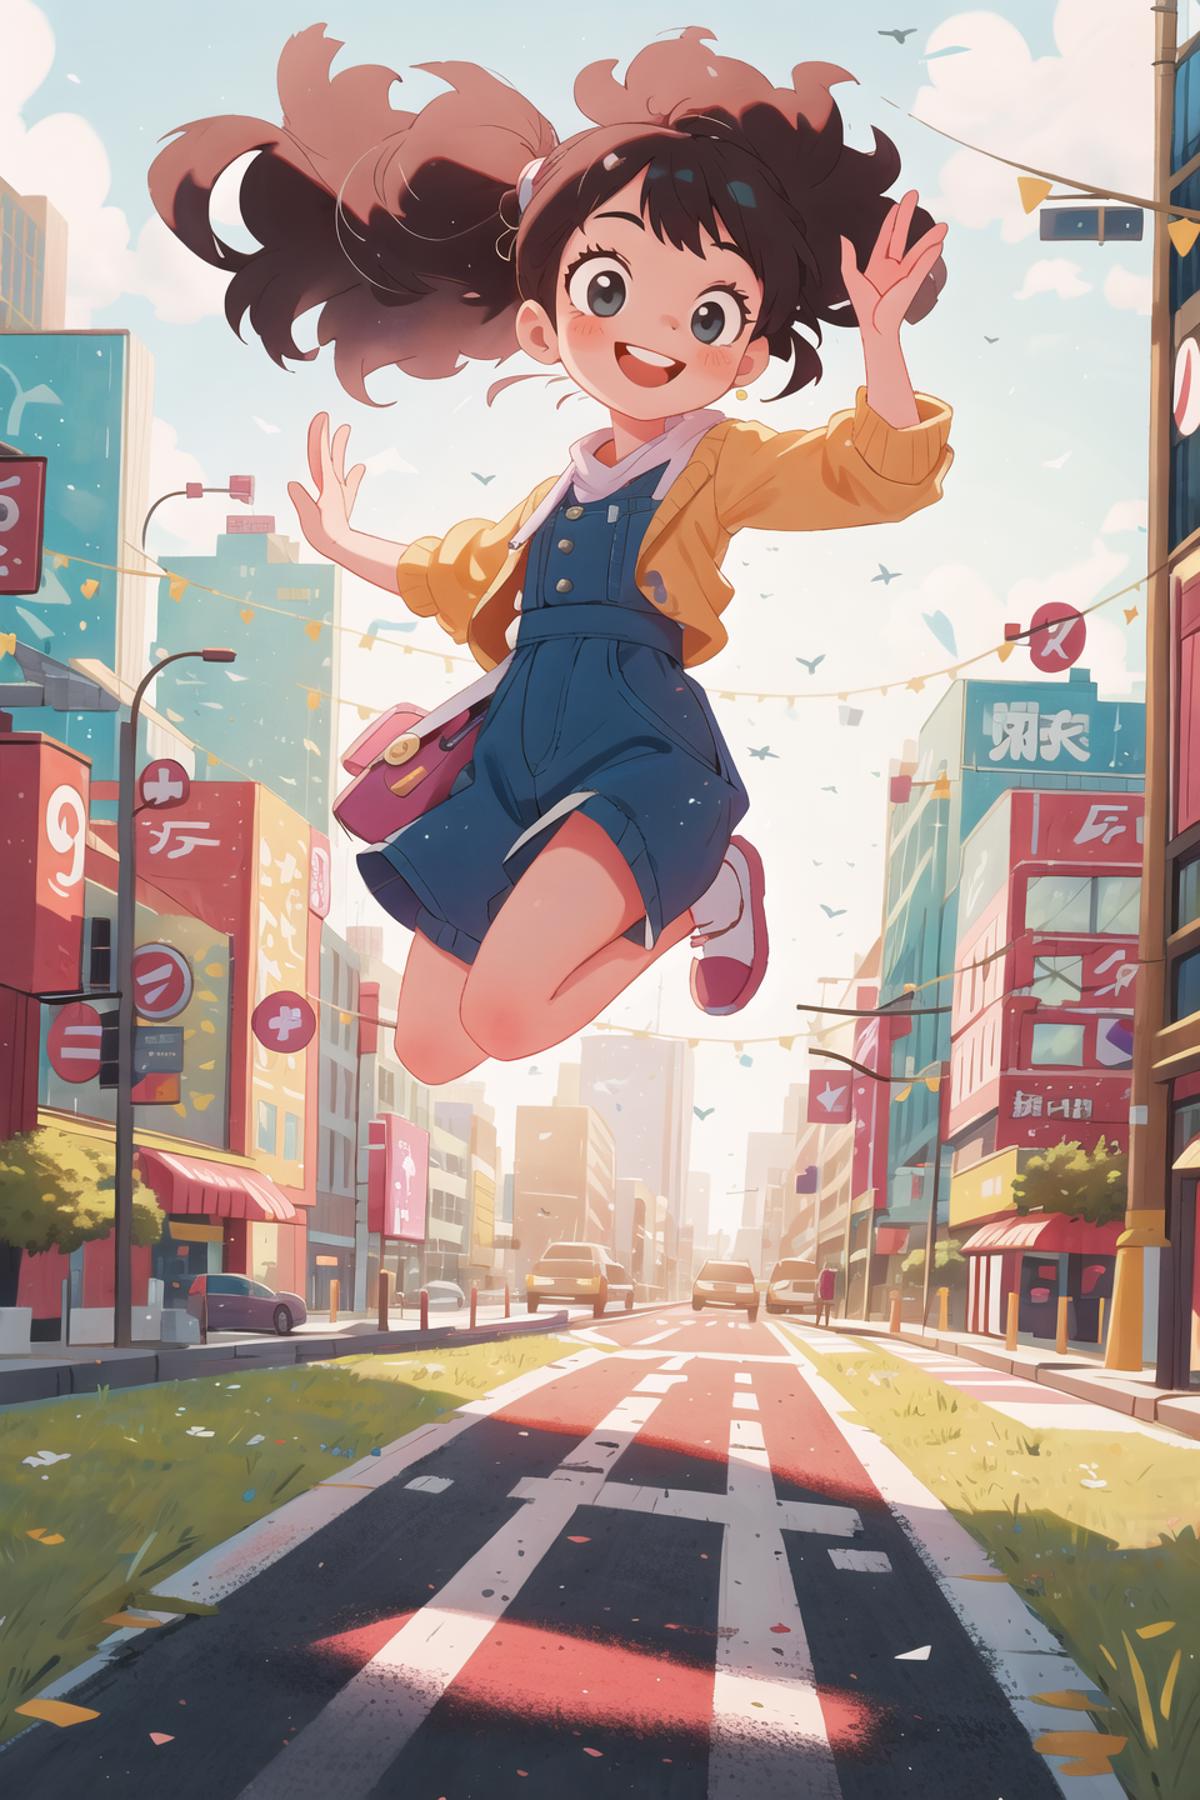 A girl with a ponytail and a yellow jacket is jumping in the air in a city.